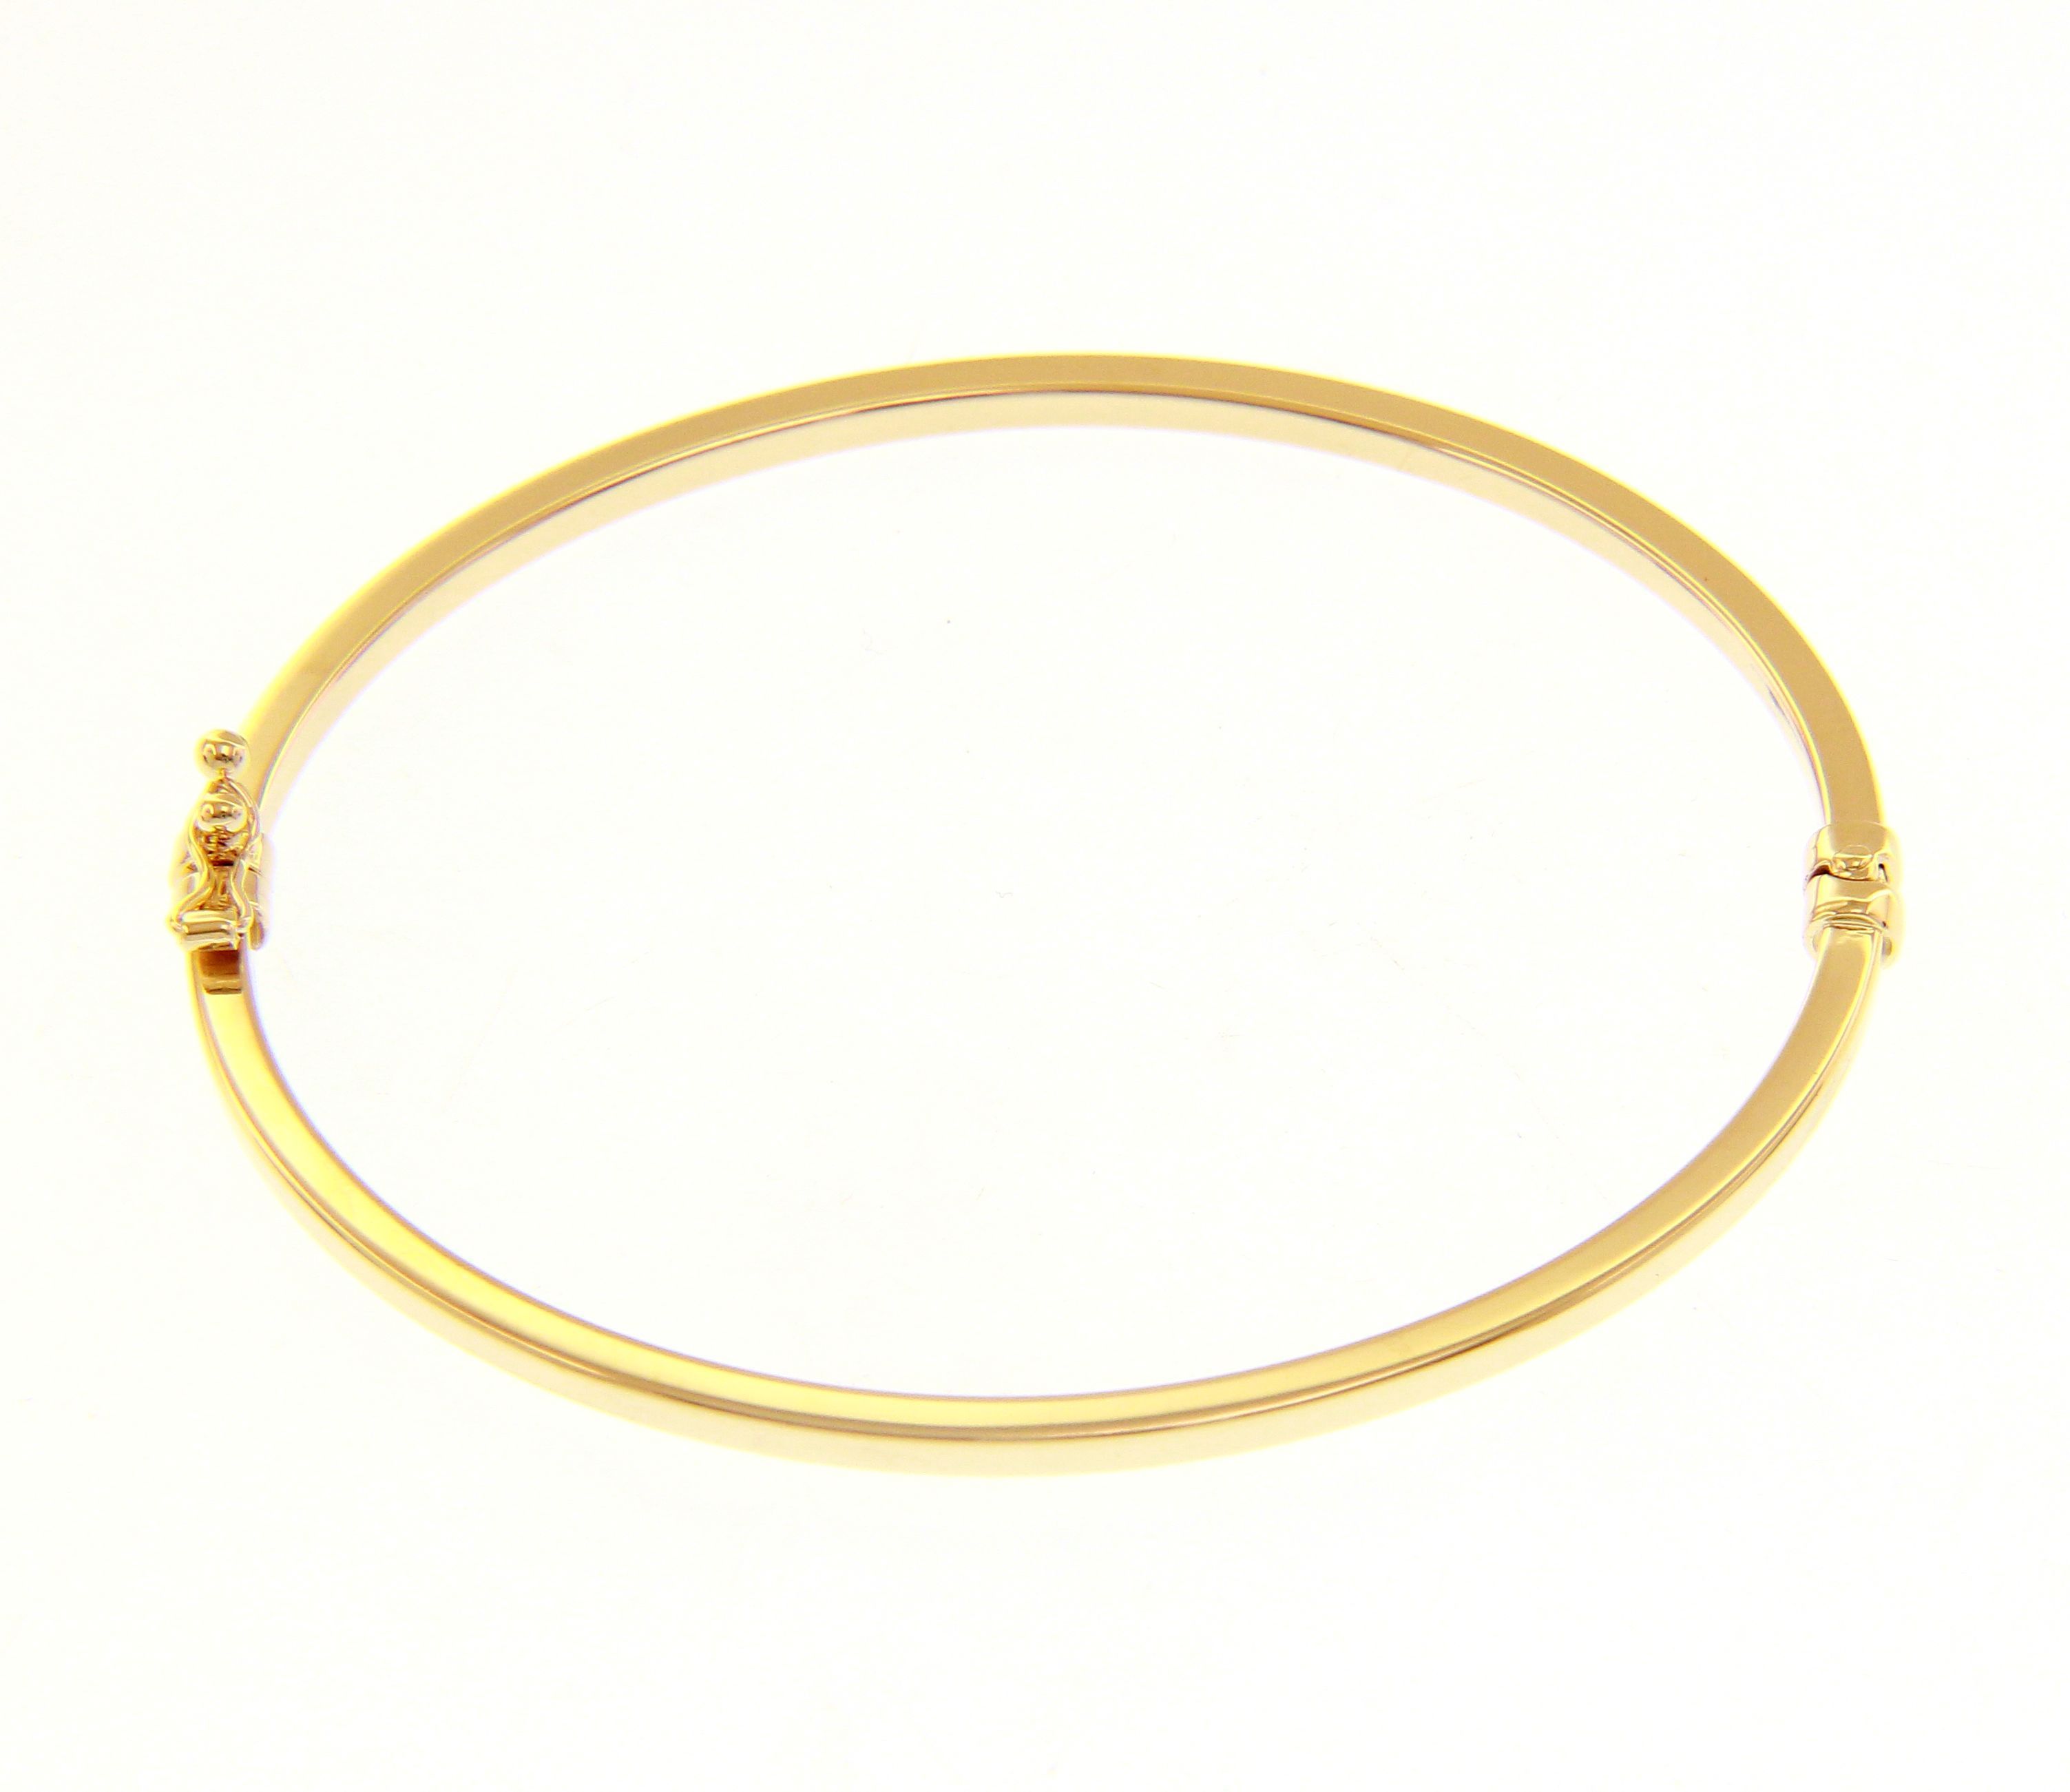 Rose gold oval bracelet with clasp k14 (code S219994)